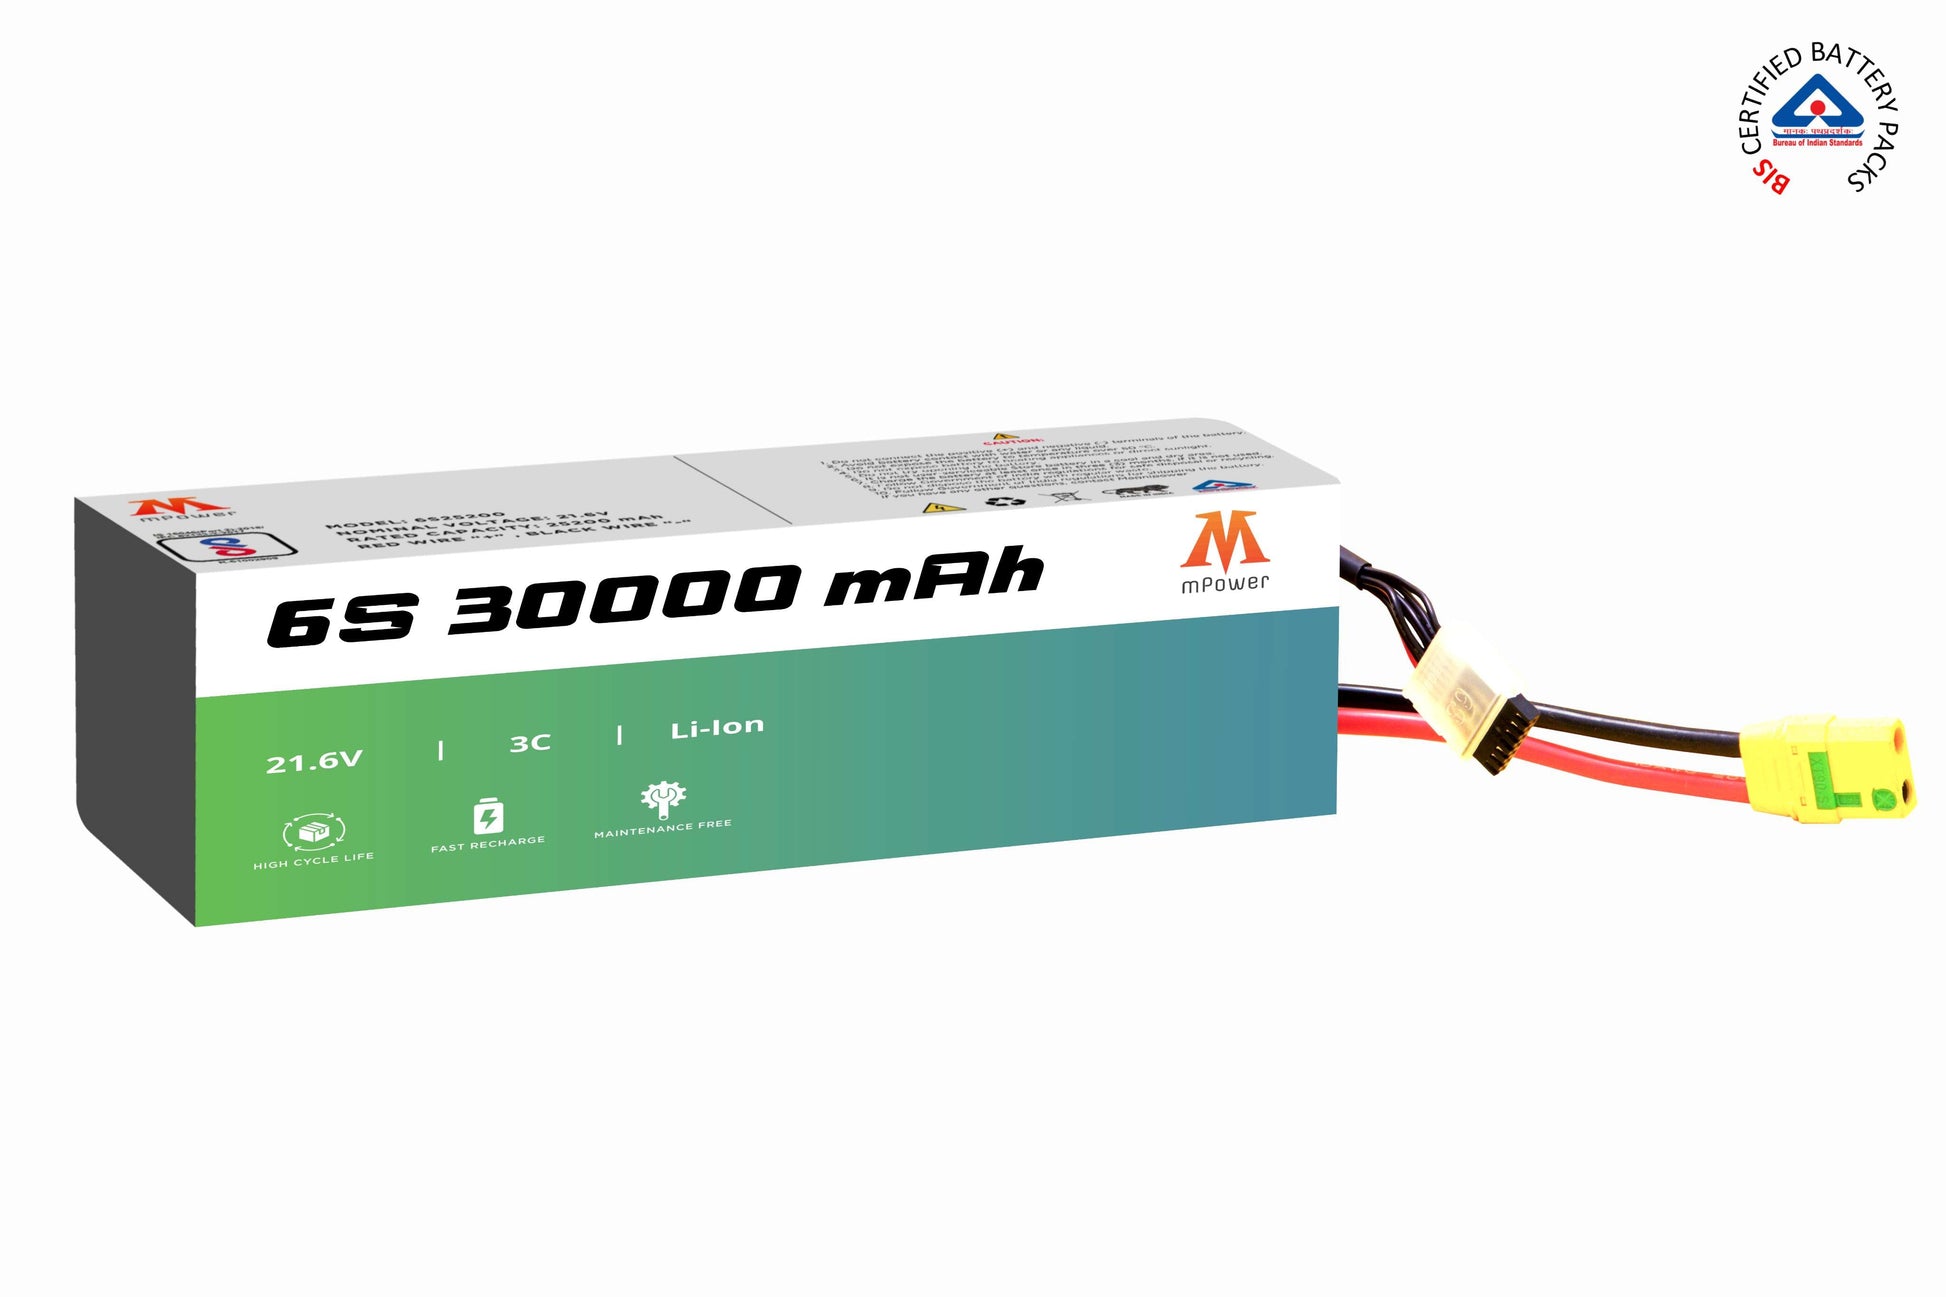 mPower 6S 30000mAh Lithium-Ion Battery for Delivery Drones-mpowerlithium